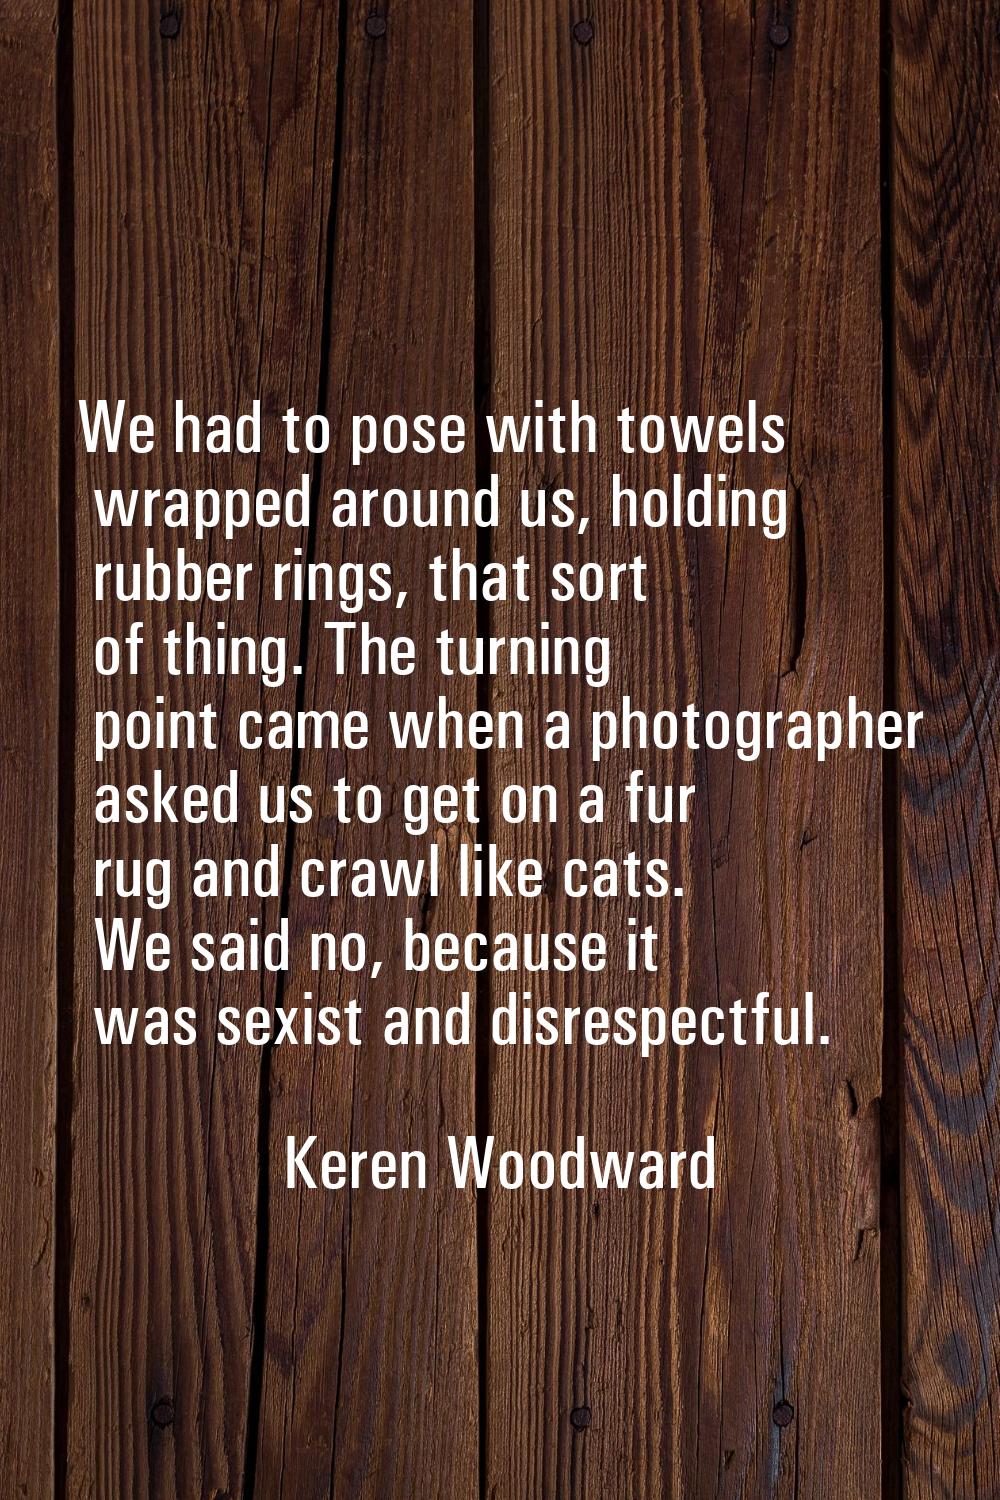 We had to pose with towels wrapped around us, holding rubber rings, that sort of thing. The turning